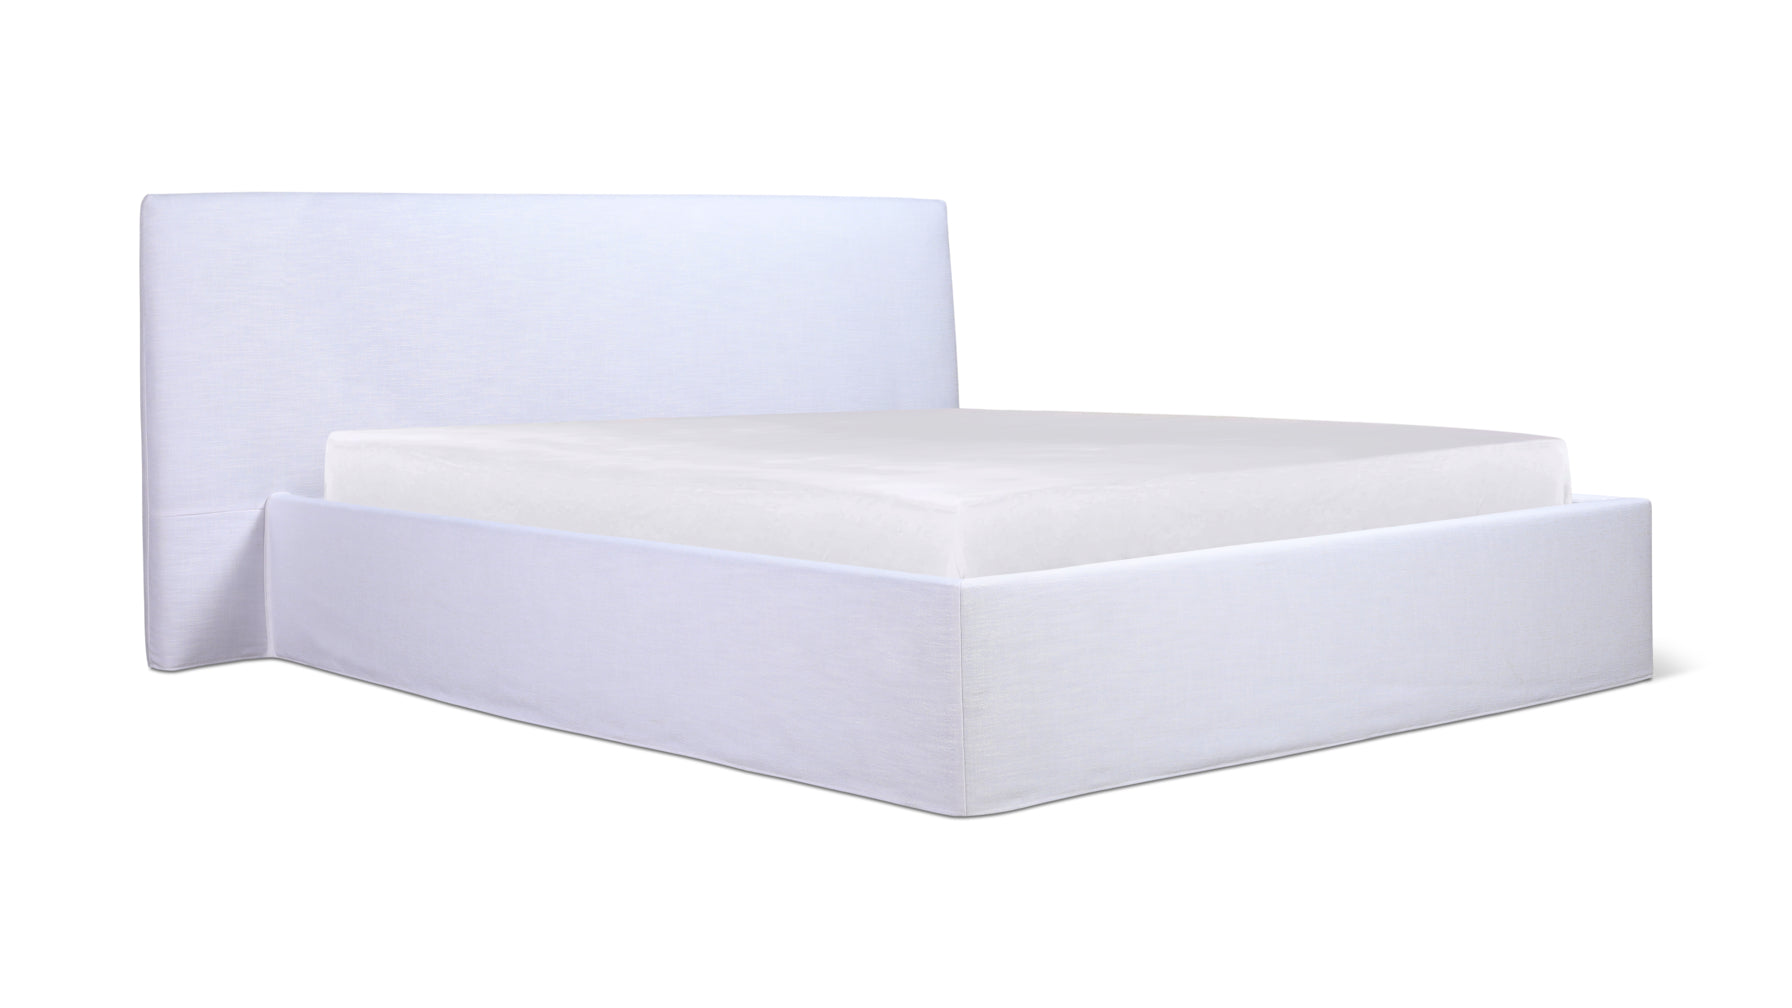 Wave Bed with Storage, King, White - Image 4